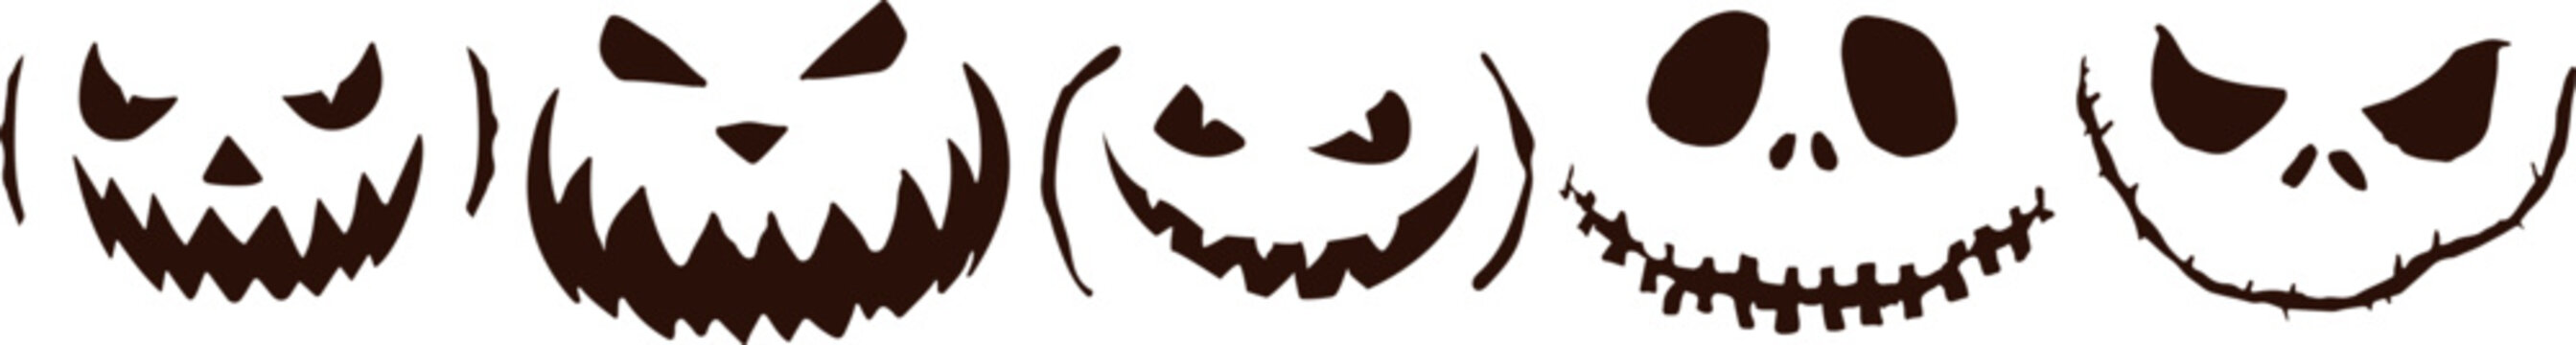 Scary Halloween pumpkin faces icons set on white background. 5 in 1. Vector graphic